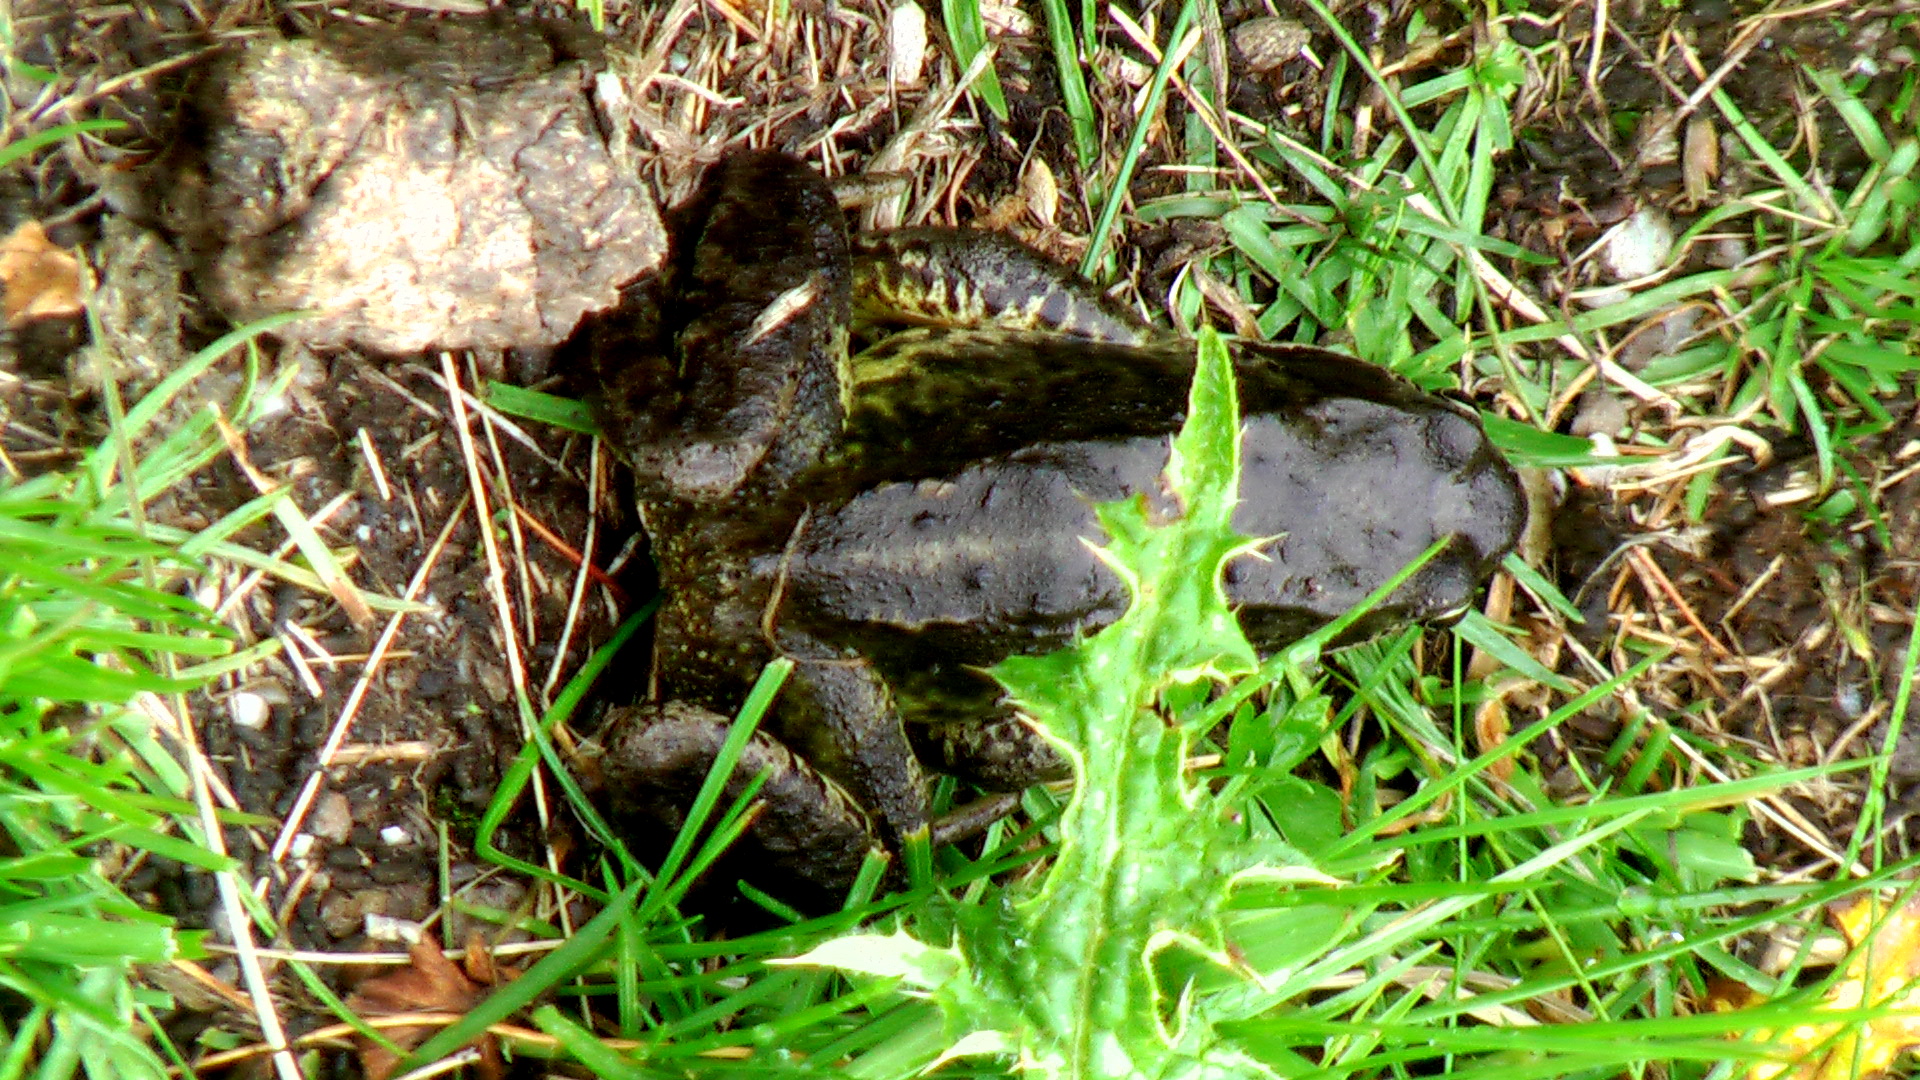 a big toad walking on the grass near the rocks